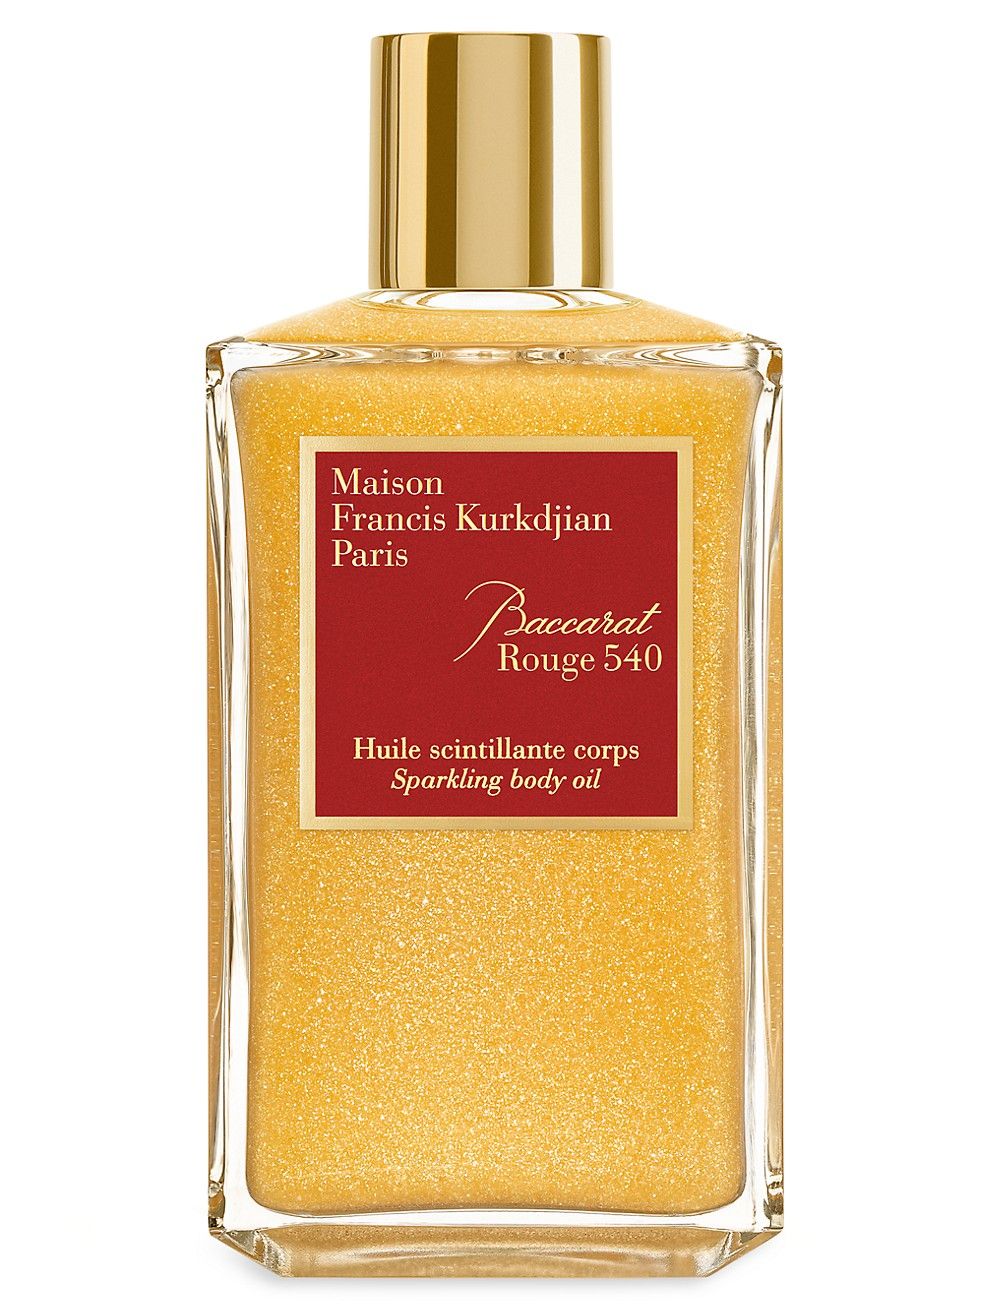 Baccarat Rouge 540 Sparkling Body Oil | Saks Fifth Avenue